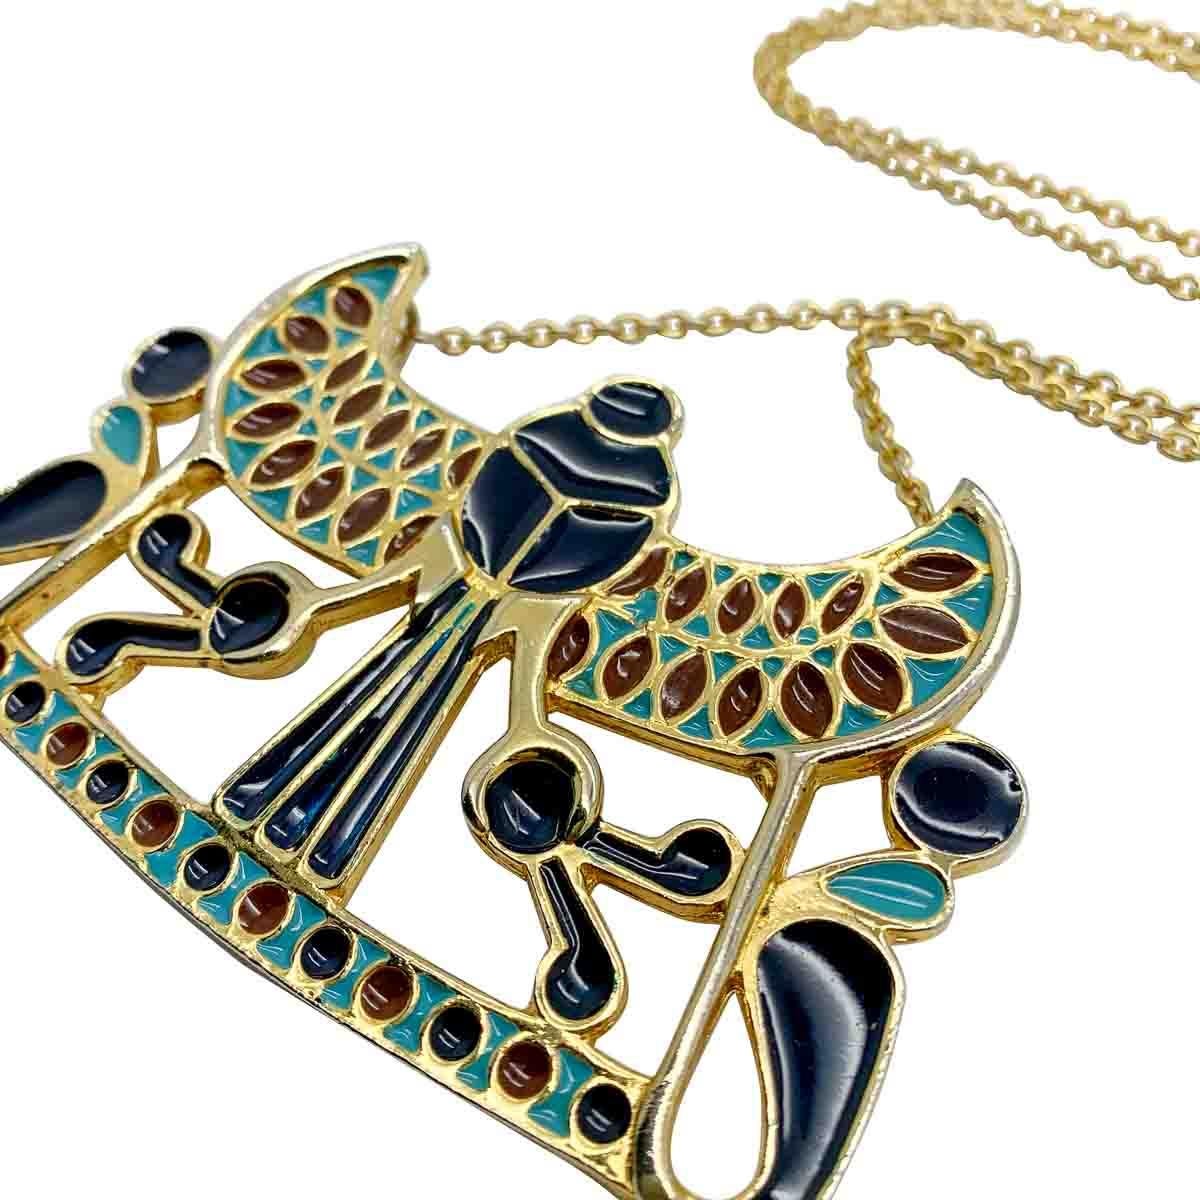 A striking vintage Egyptian plaque necklace by Adrian Mann, London during the 1970s. Featuring an impressive Egyptian revival motif decorated with contrasting enamelled colours of deep blue, turquoise and brown.

Vintage Condition: Very good without